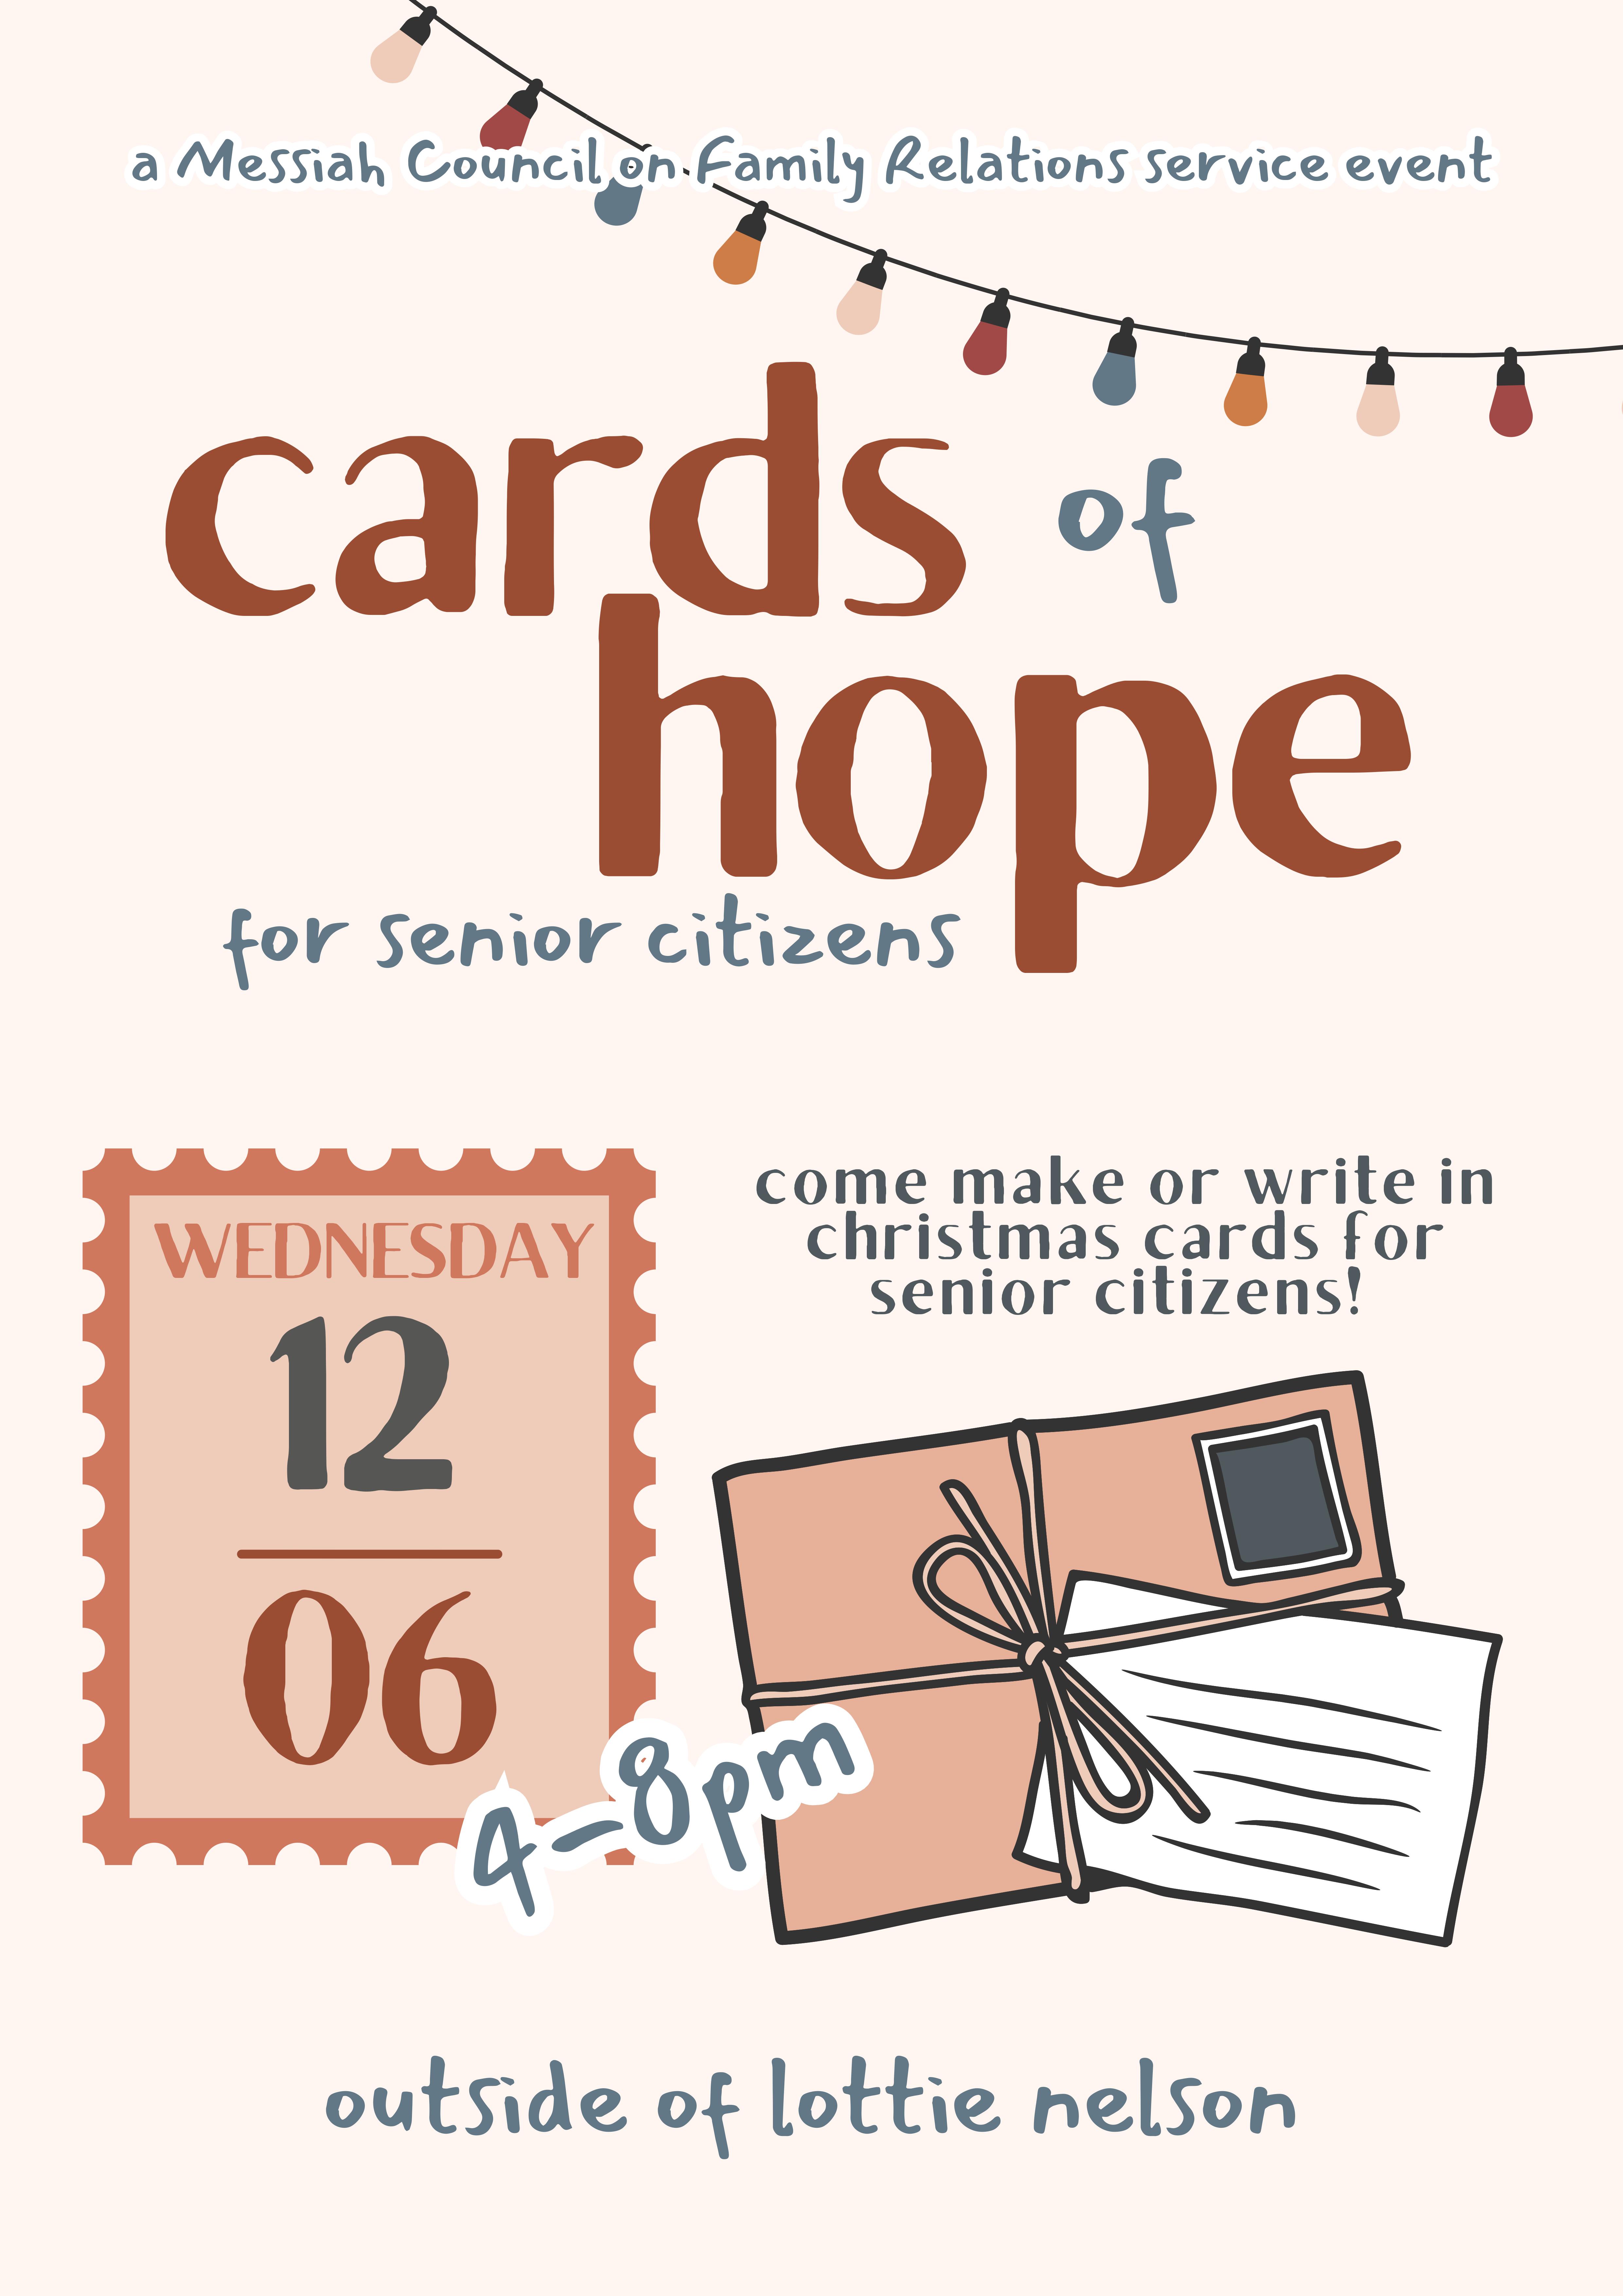 Cards of hope flyer